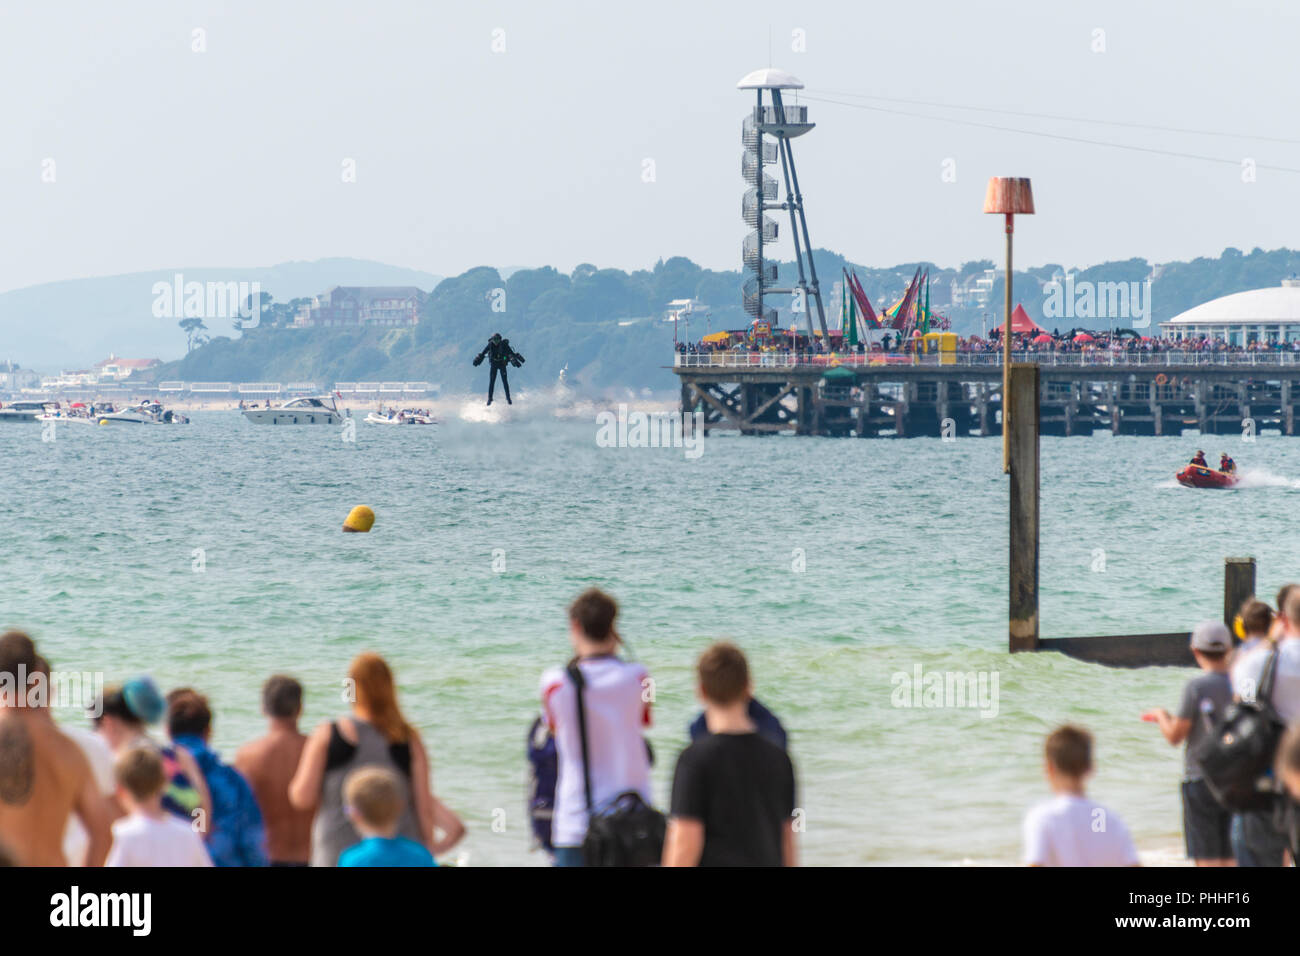 Bournemouth, UK. 1st September 2018. Richard Browning, the founder of Gravity Industries, has a malfunction at Bournemouth Air Festival and ends up crashing into the sea in his jet suit. He is uninjured and walks away with a very wet piece of kit. Part of the annual Air Festival in Bournemouth, Dorset. Credit: Thomas Faull/Alamy Live News Stock Photo